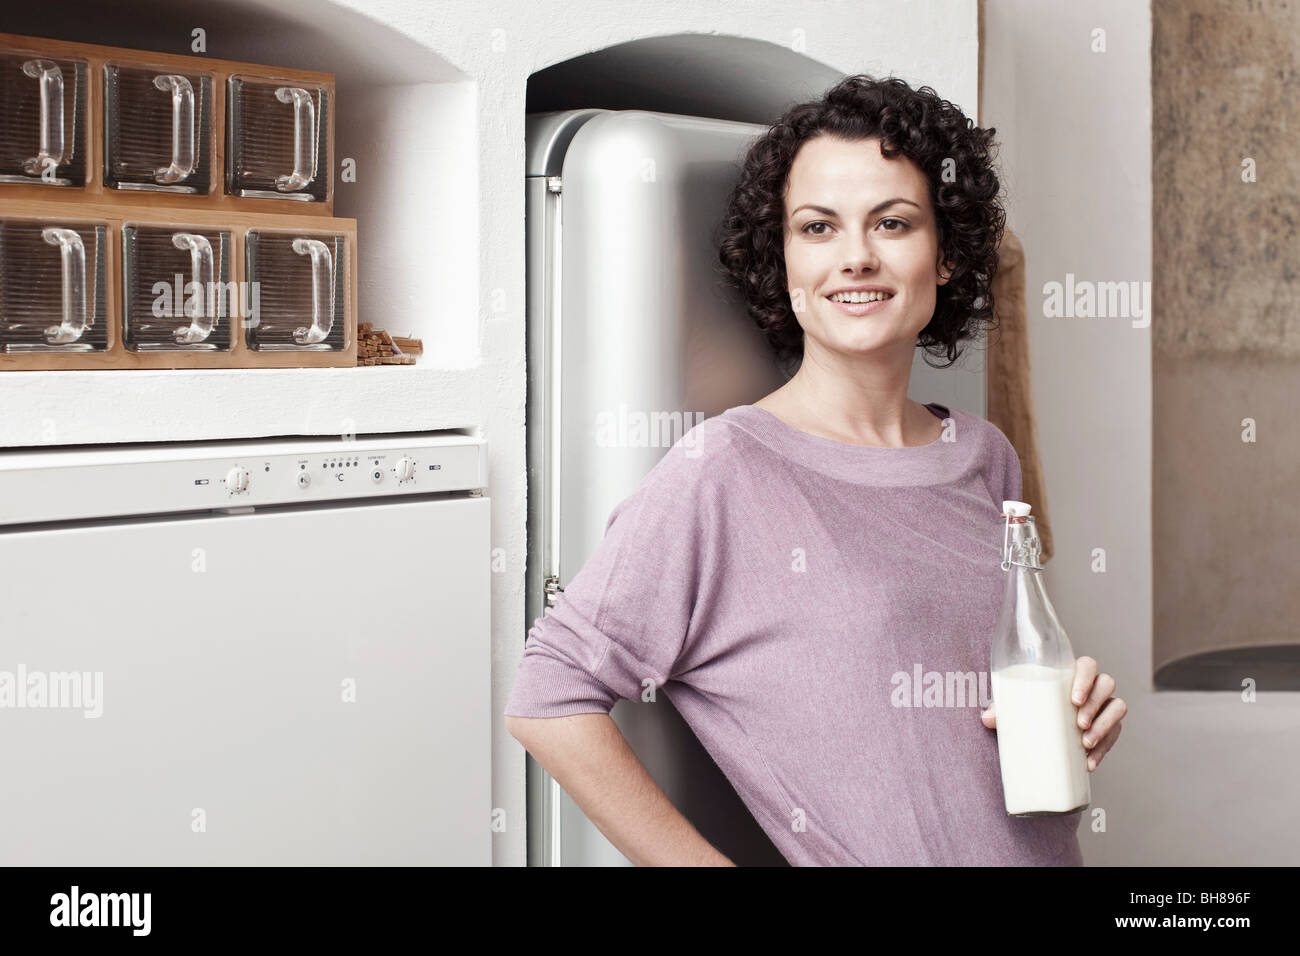 A woman holding a bottle of milk in the kitchen Stock Photo